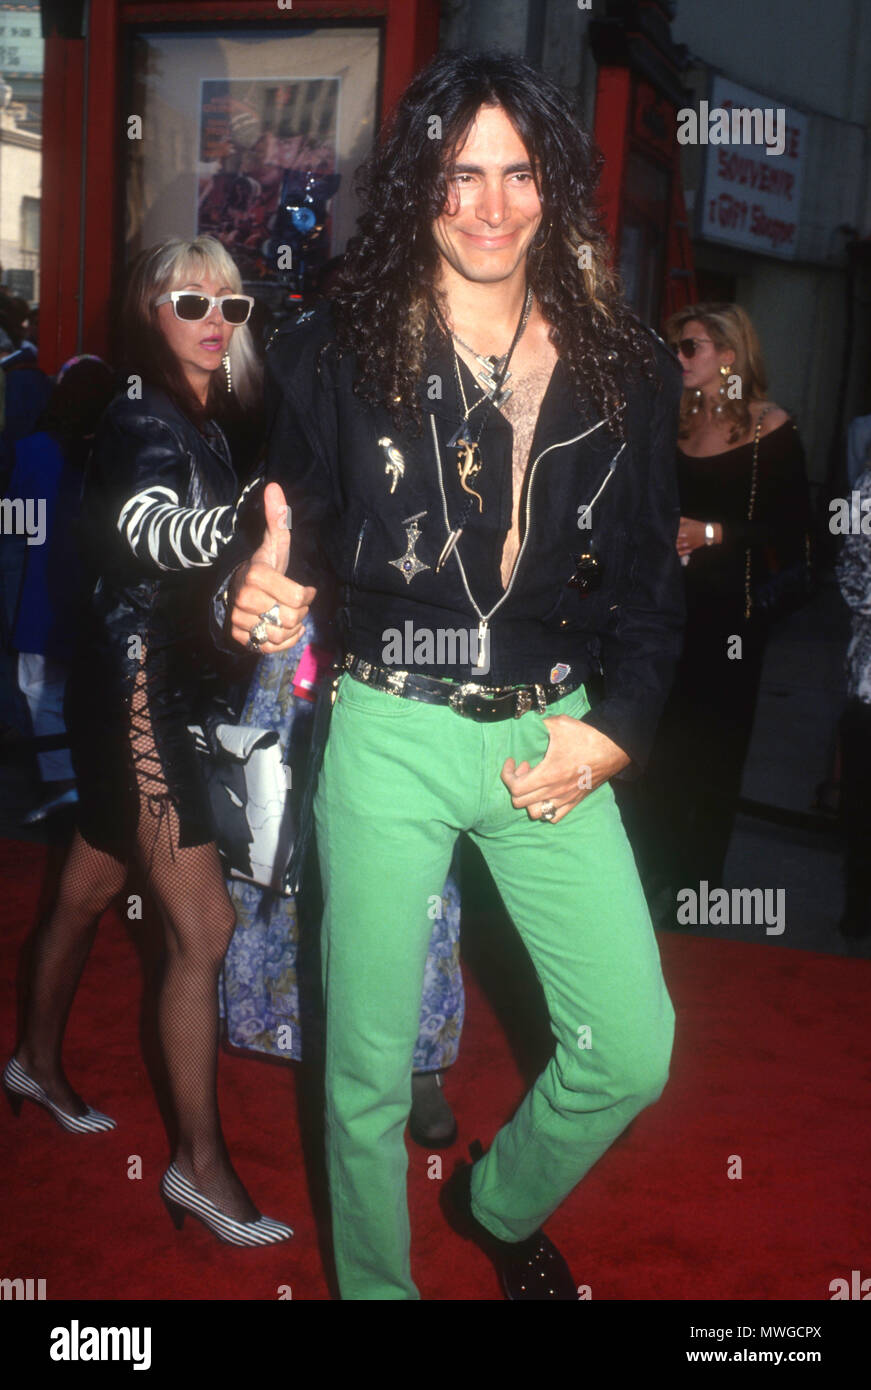 HOLLYWOOD, CA - JULY 11: Musician/singer Steve Vai attends the 'Bill & Ted's Bogus Journey' Hollywood Premiere on July 11, 1991 at Mann's Chinese Theatre in Hollywood, California. Photo by Barry King/Alamy Stock Photo Stock Photo